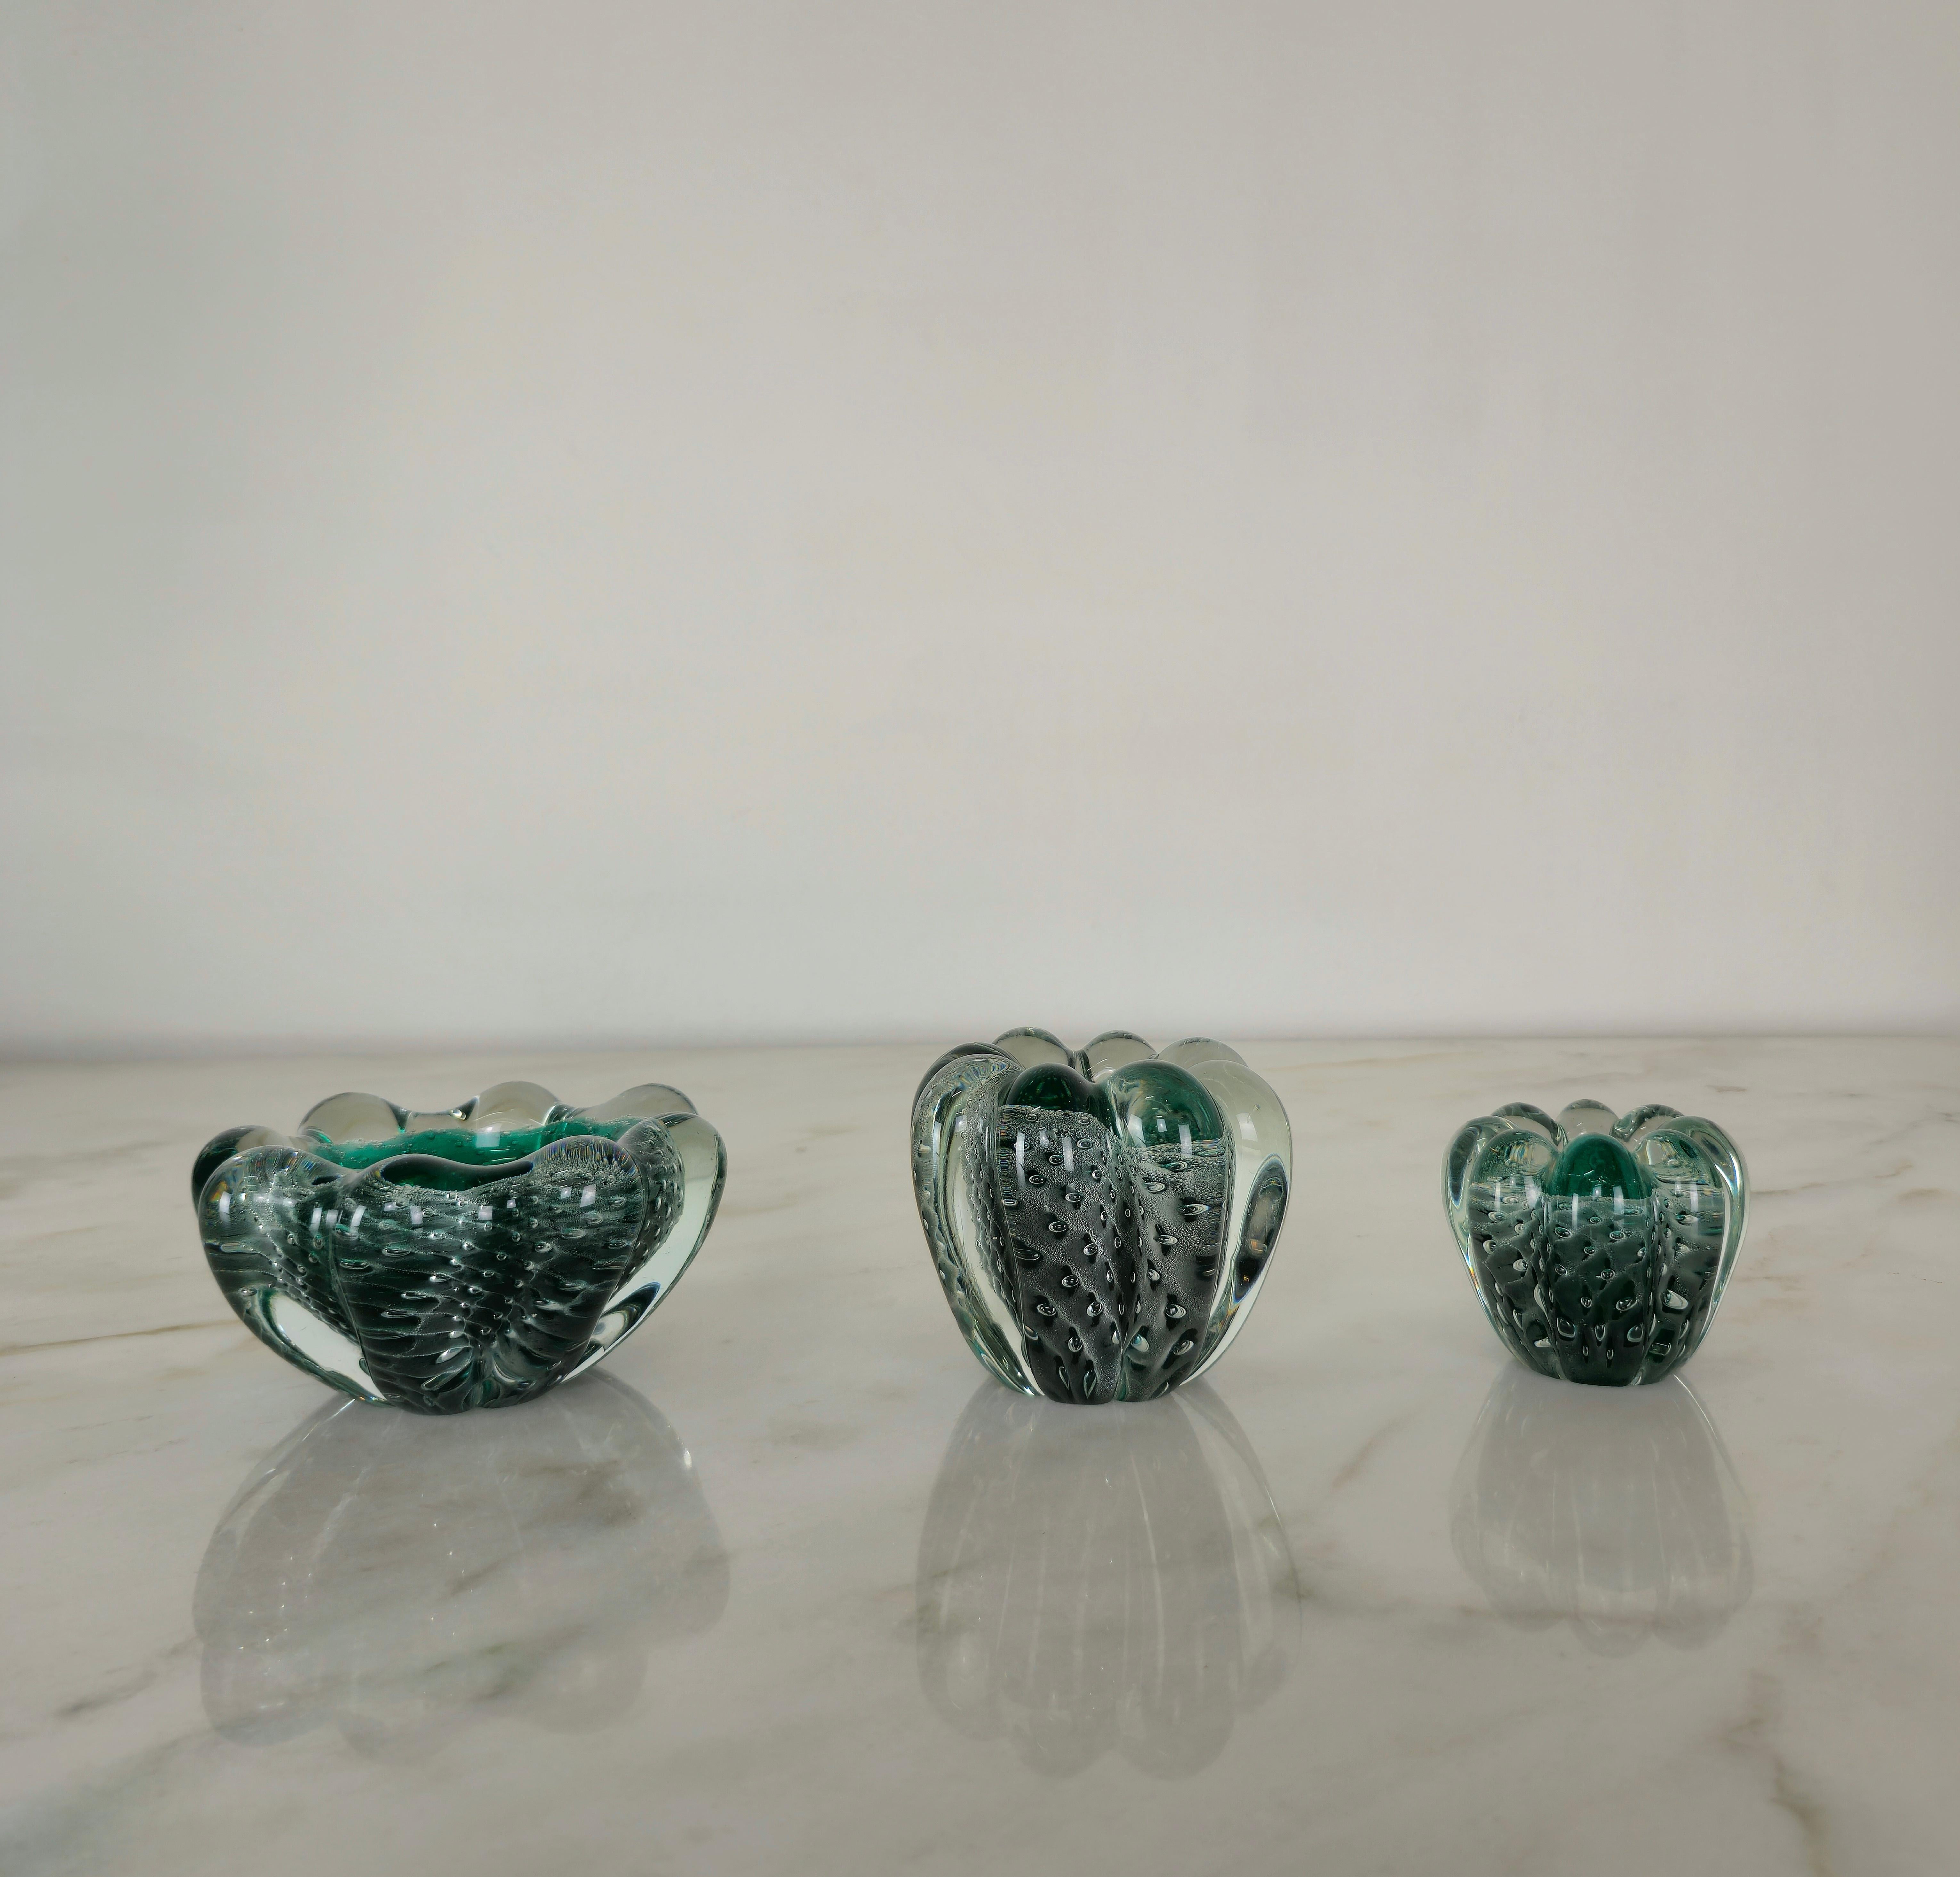 Set of 3 vide-poche/ashtrays/decorative objects of different sizes produced in Italy in the 1950s by Seguso Vetri d'Arte.
The 3 objects were made of sommerso bullicante Murano glass in shades of transparent and emerald green.


Note: We try to offer